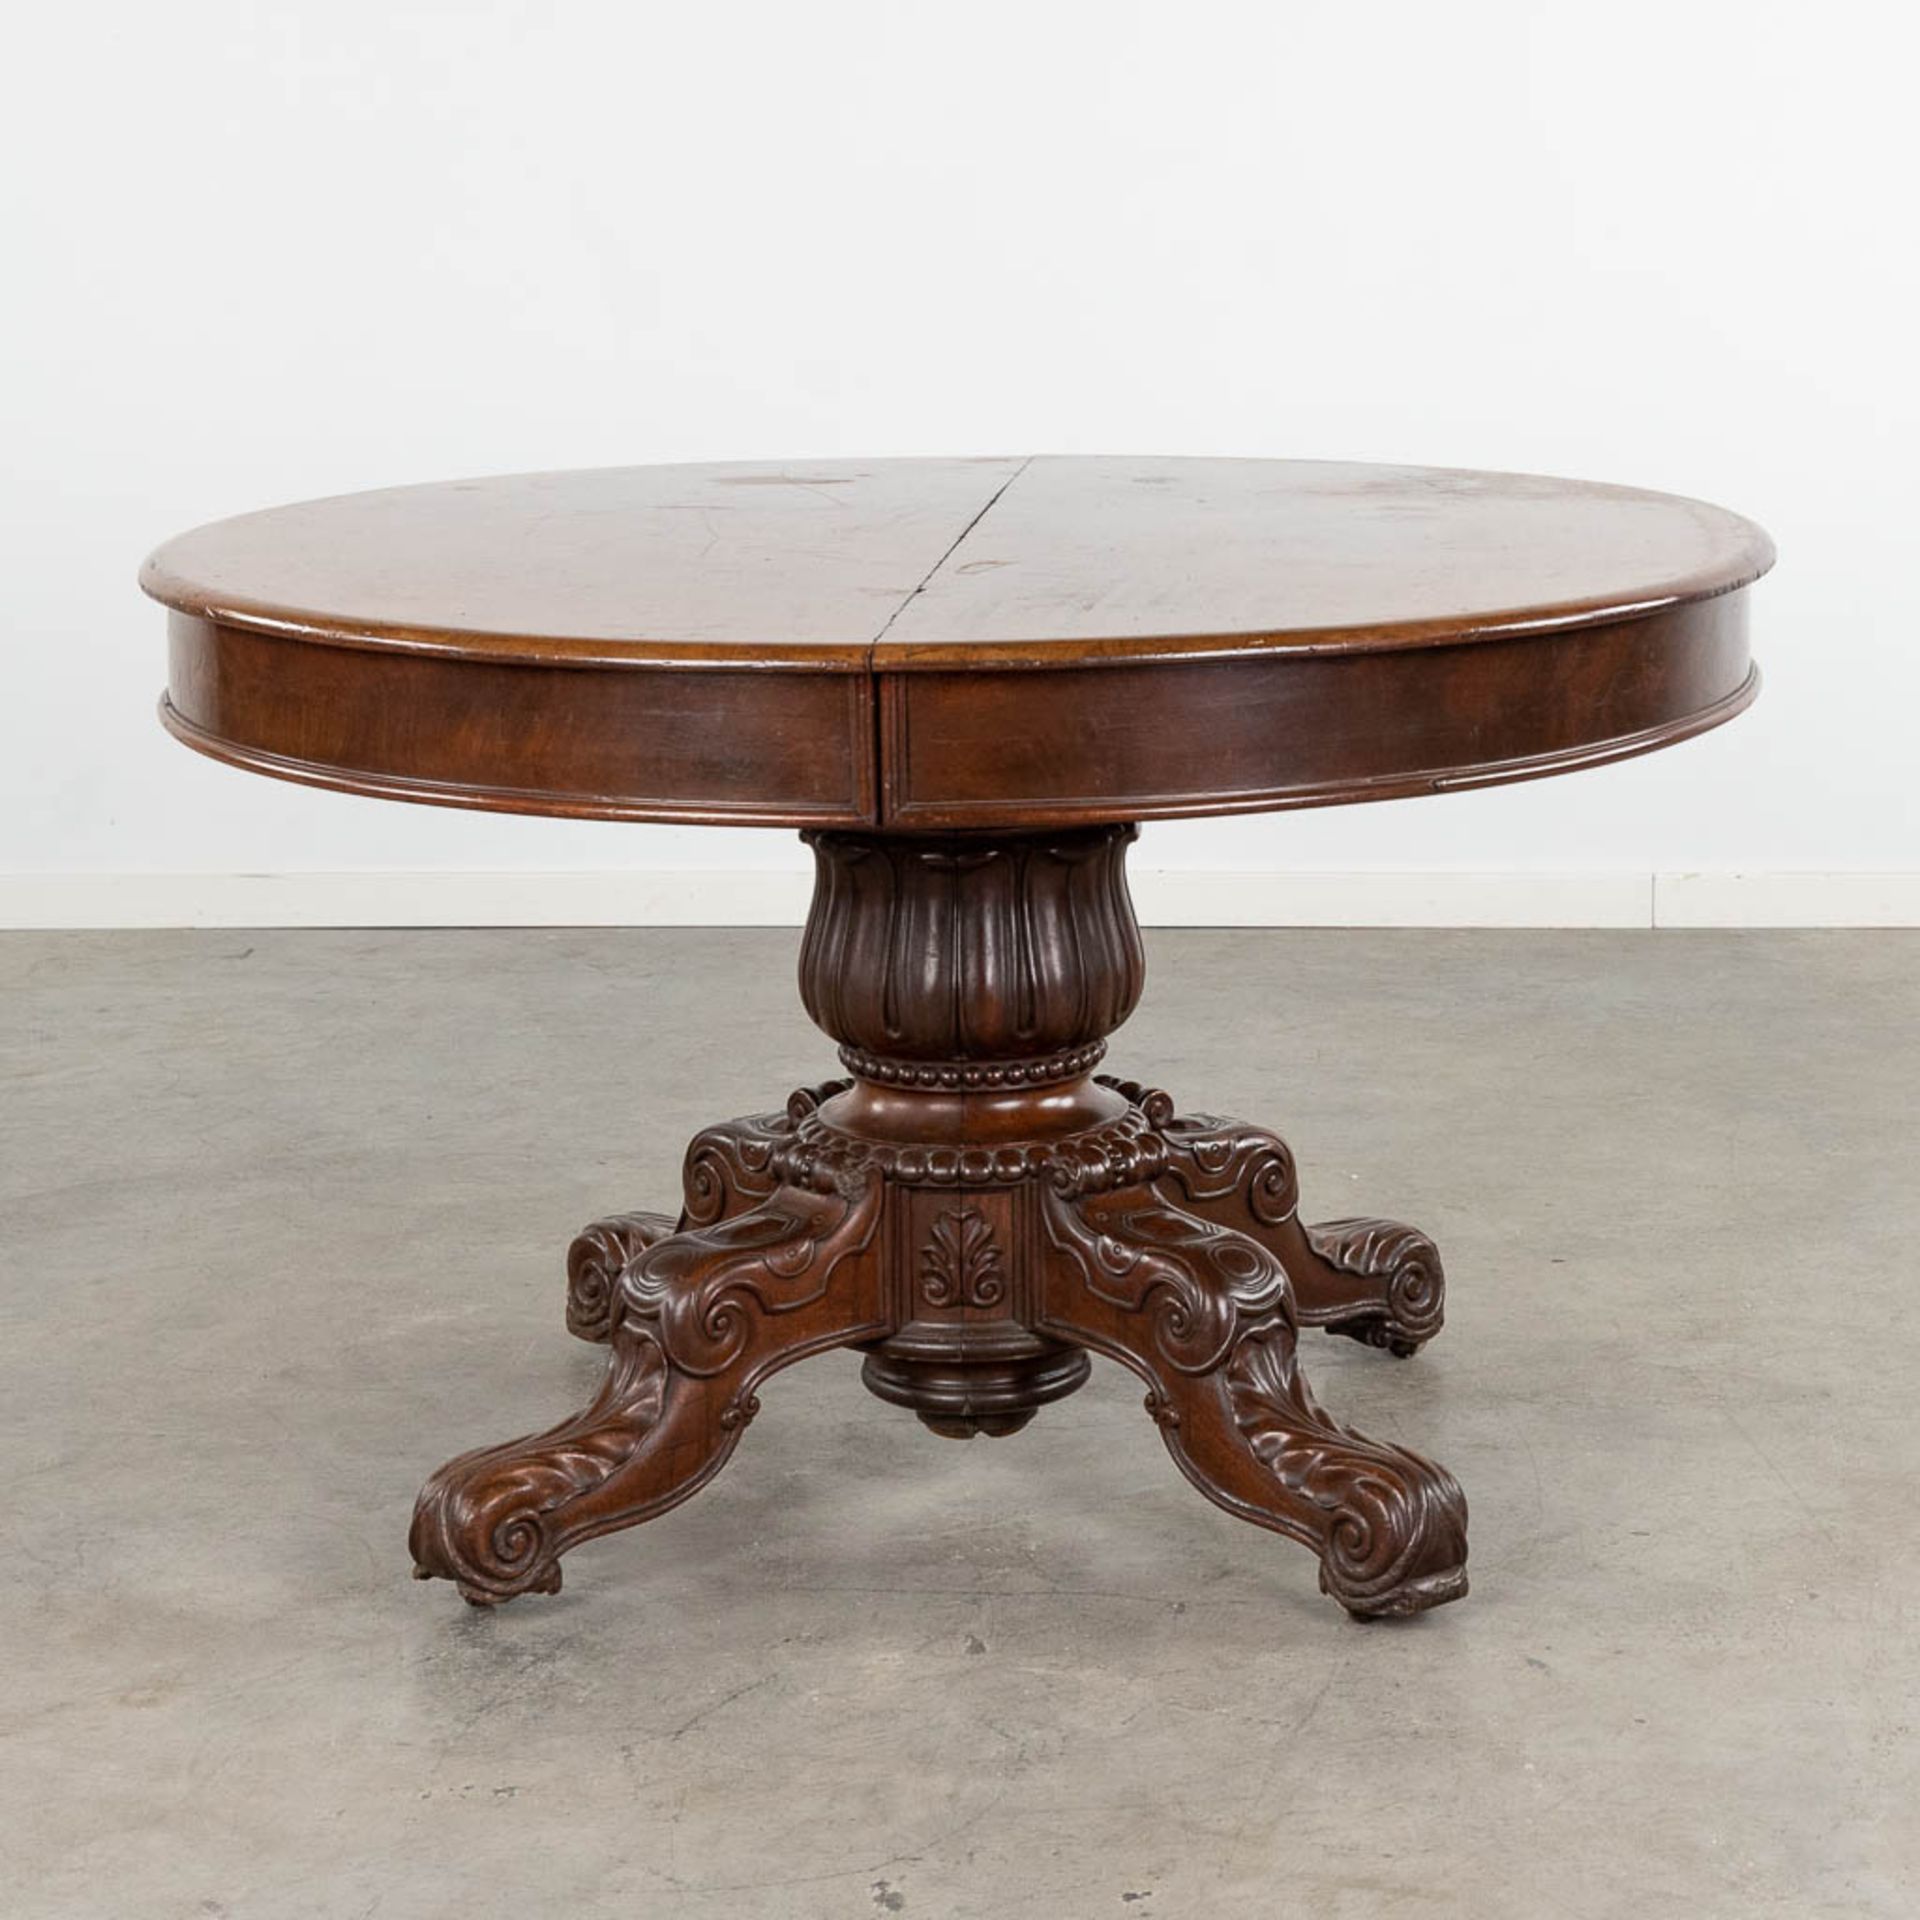 An atique oval table, Lous Philippe. (D:120 x W:139 x H:74 cm) - Image 4 of 9